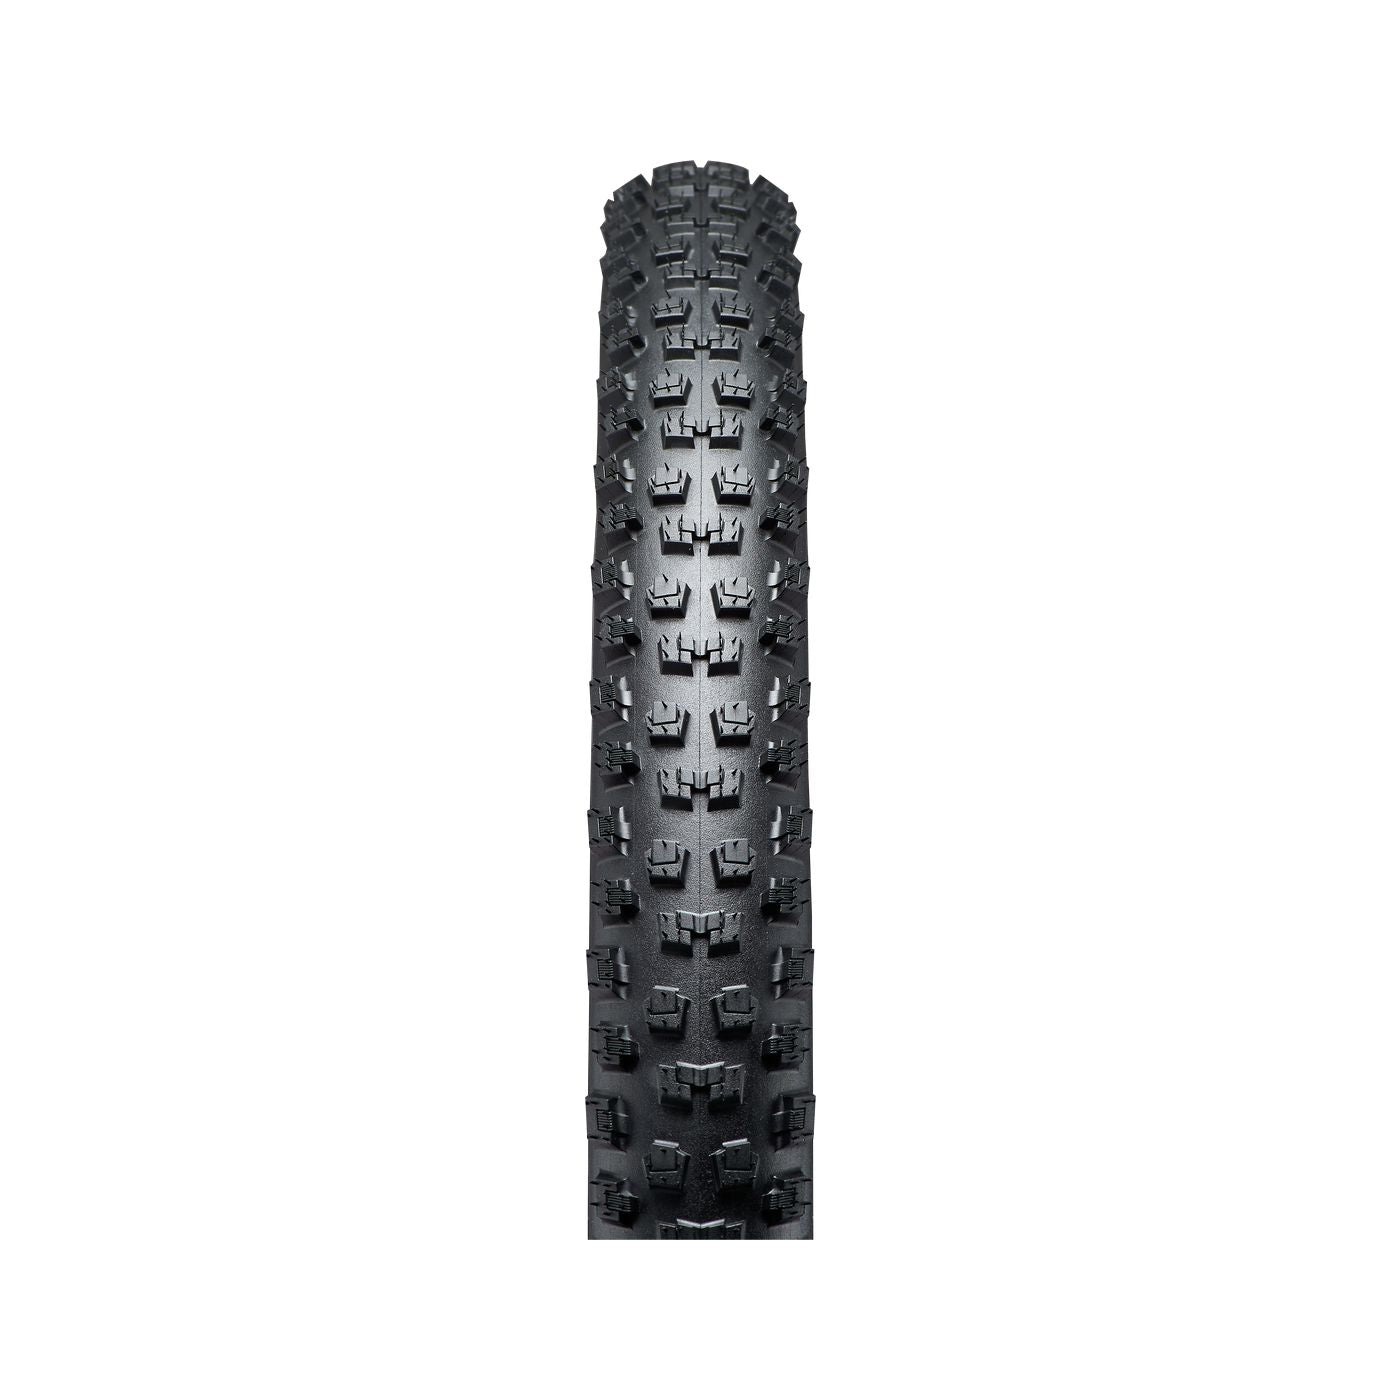 Specialized Purgatory Grid Trail 2Bliss Ready T7 29" Mountain Bike Tire - Tires - Bicycle Warehouse